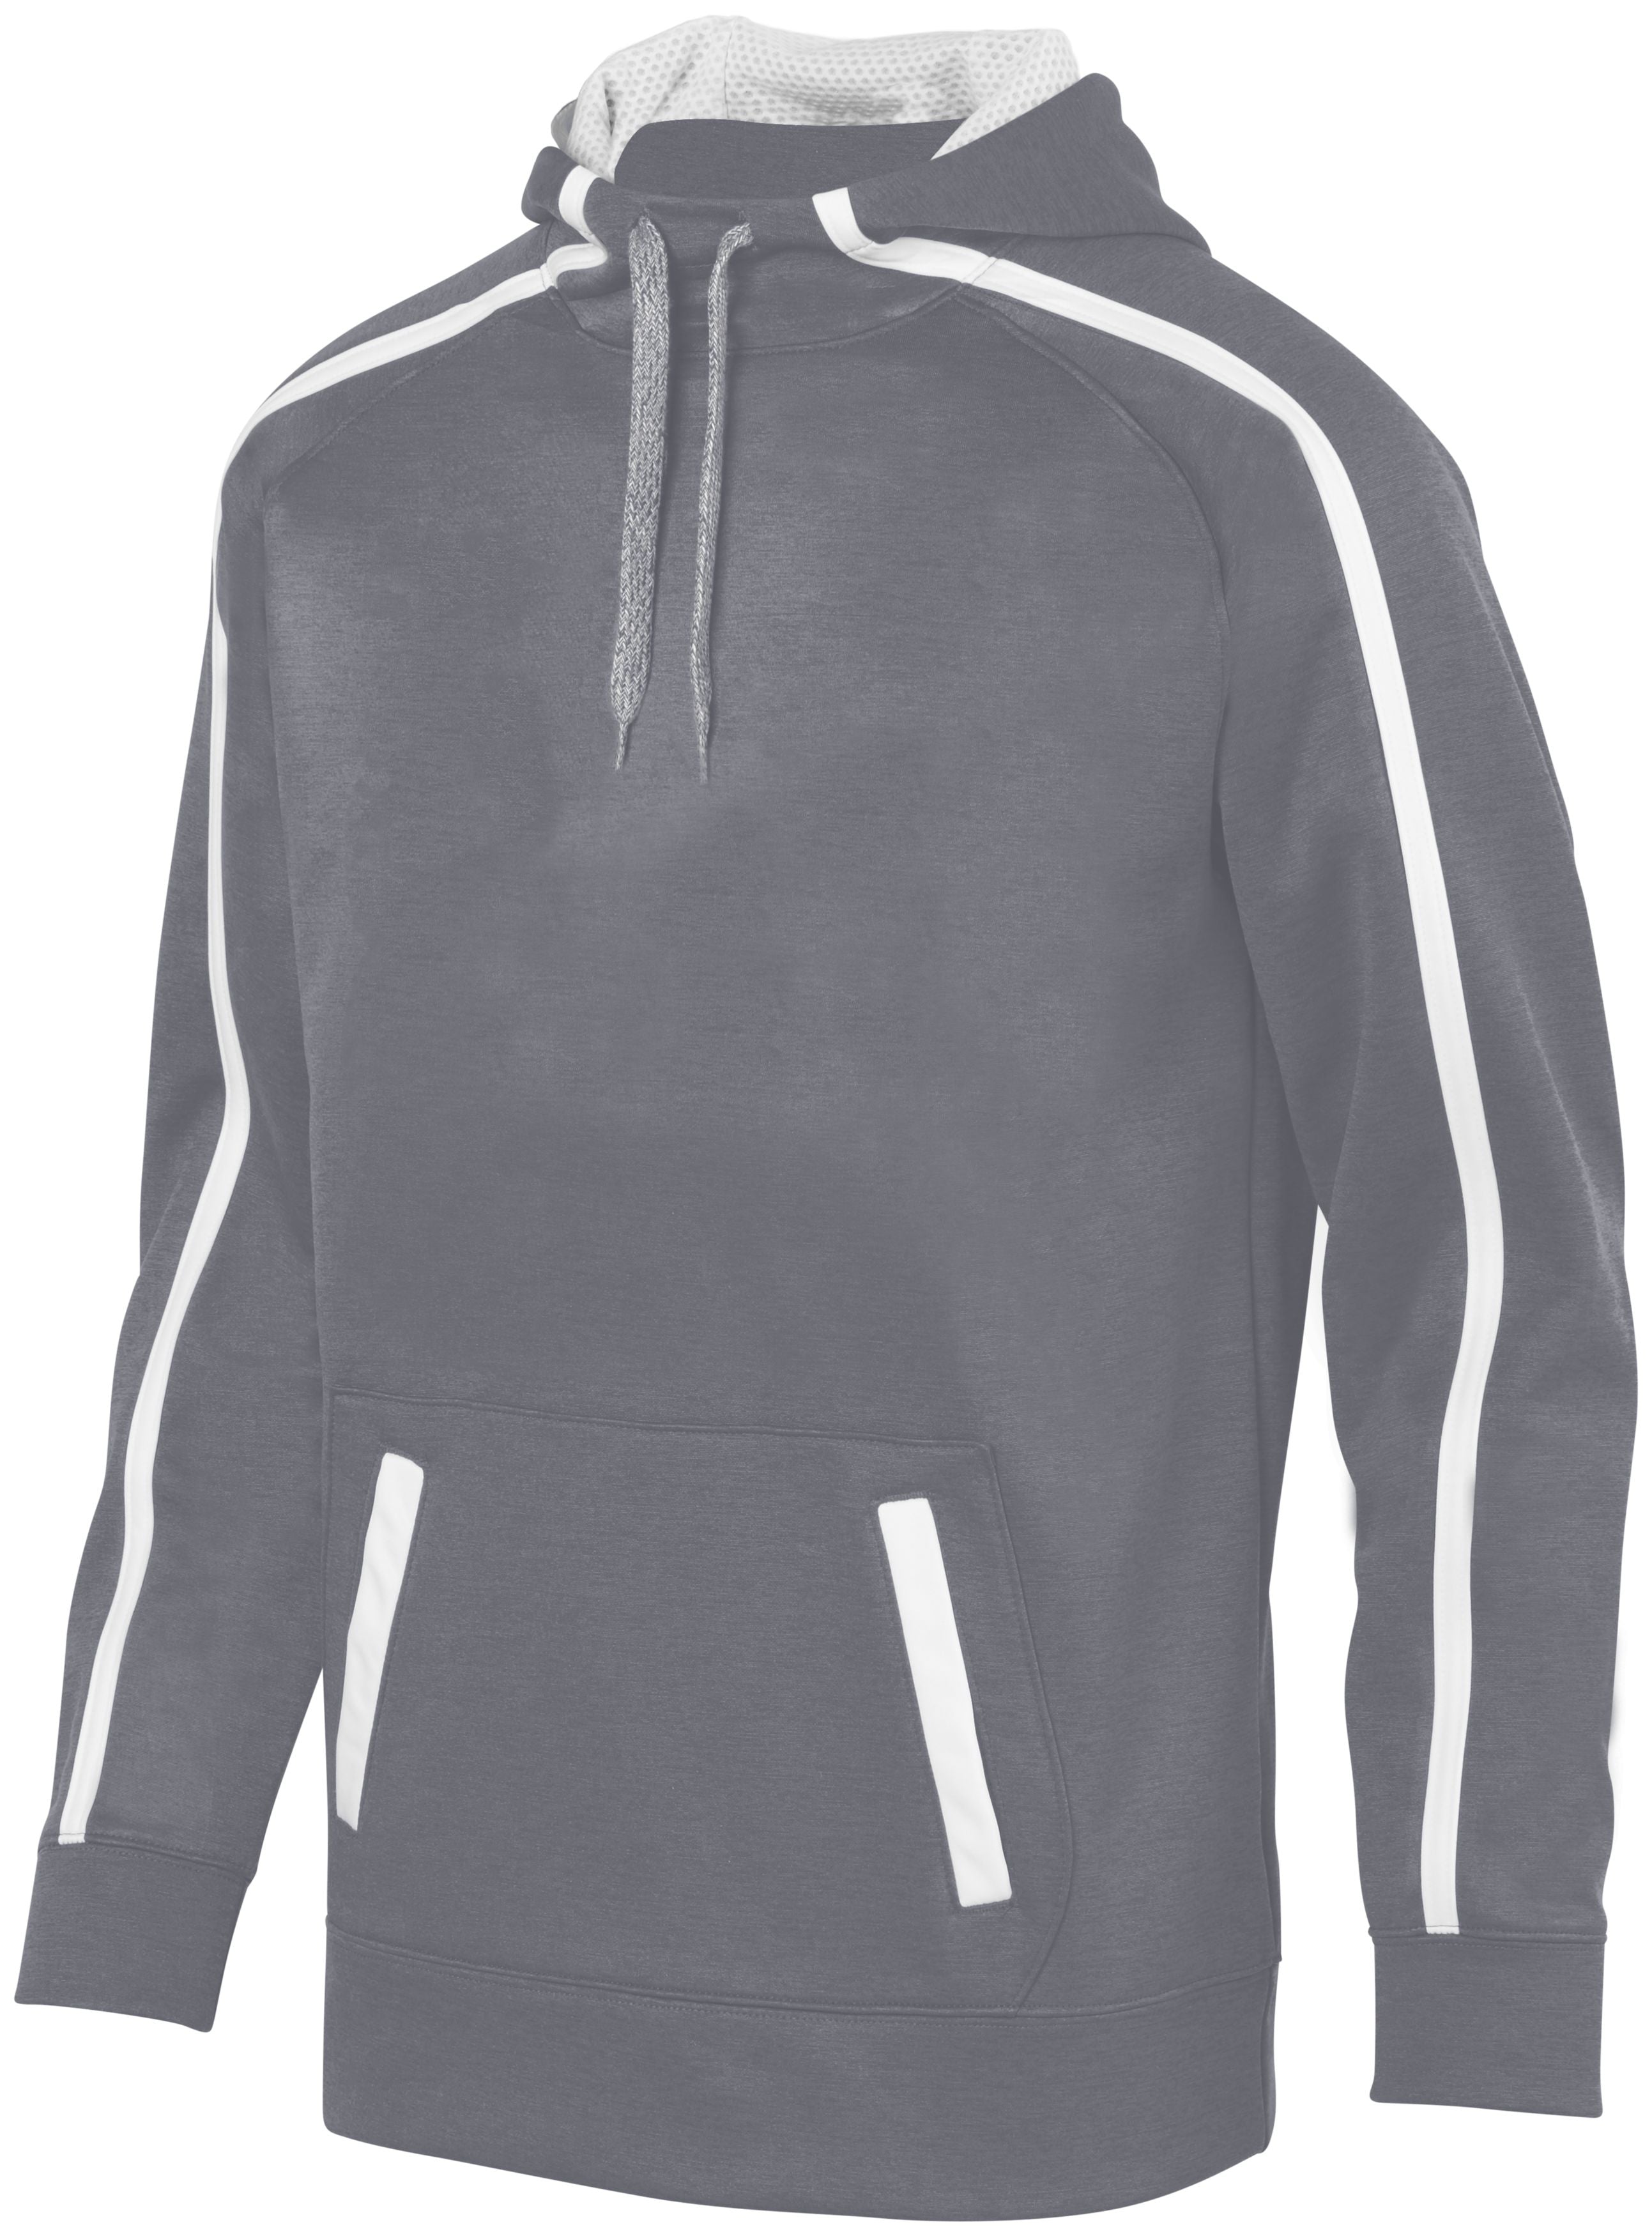 Augusta Sportswear Stoked Tonal Heather Hoodie in Graphite/White  -Part of the Adult, Augusta-Products, Shirts, Tonal-Fleece-Collection product lines at KanaleyCreations.com